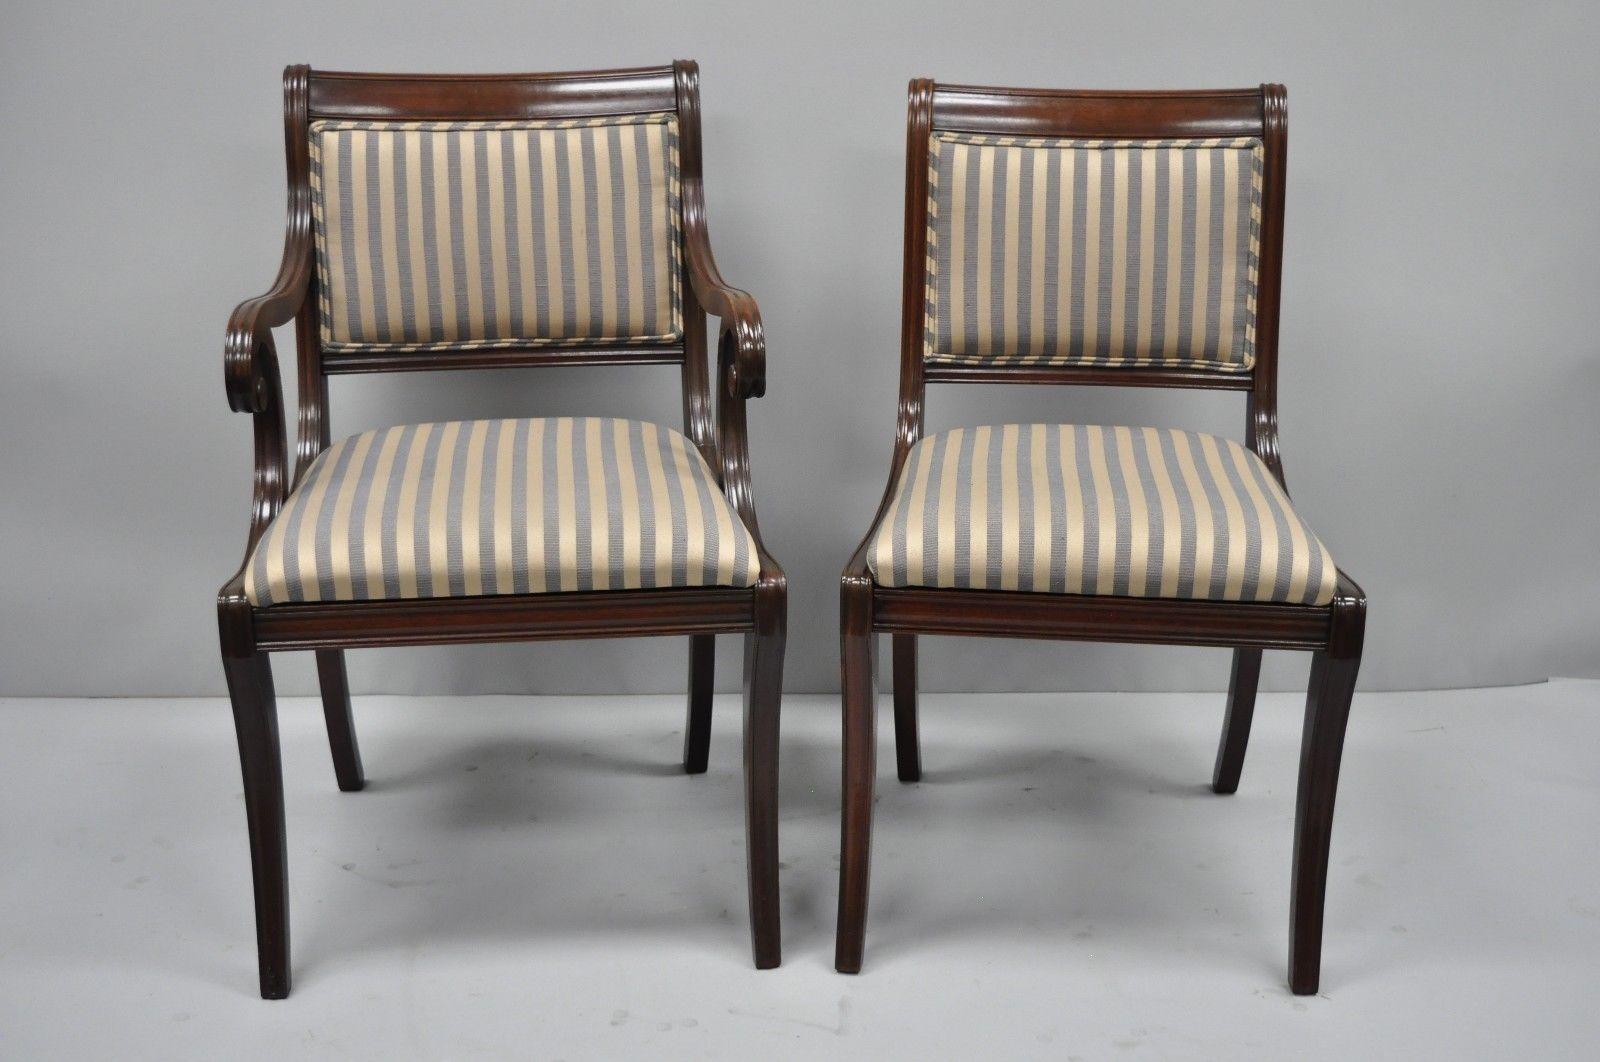 American Mahogany Saber Leg Regency Style Upholstered Dining Room Chairs Set of Six